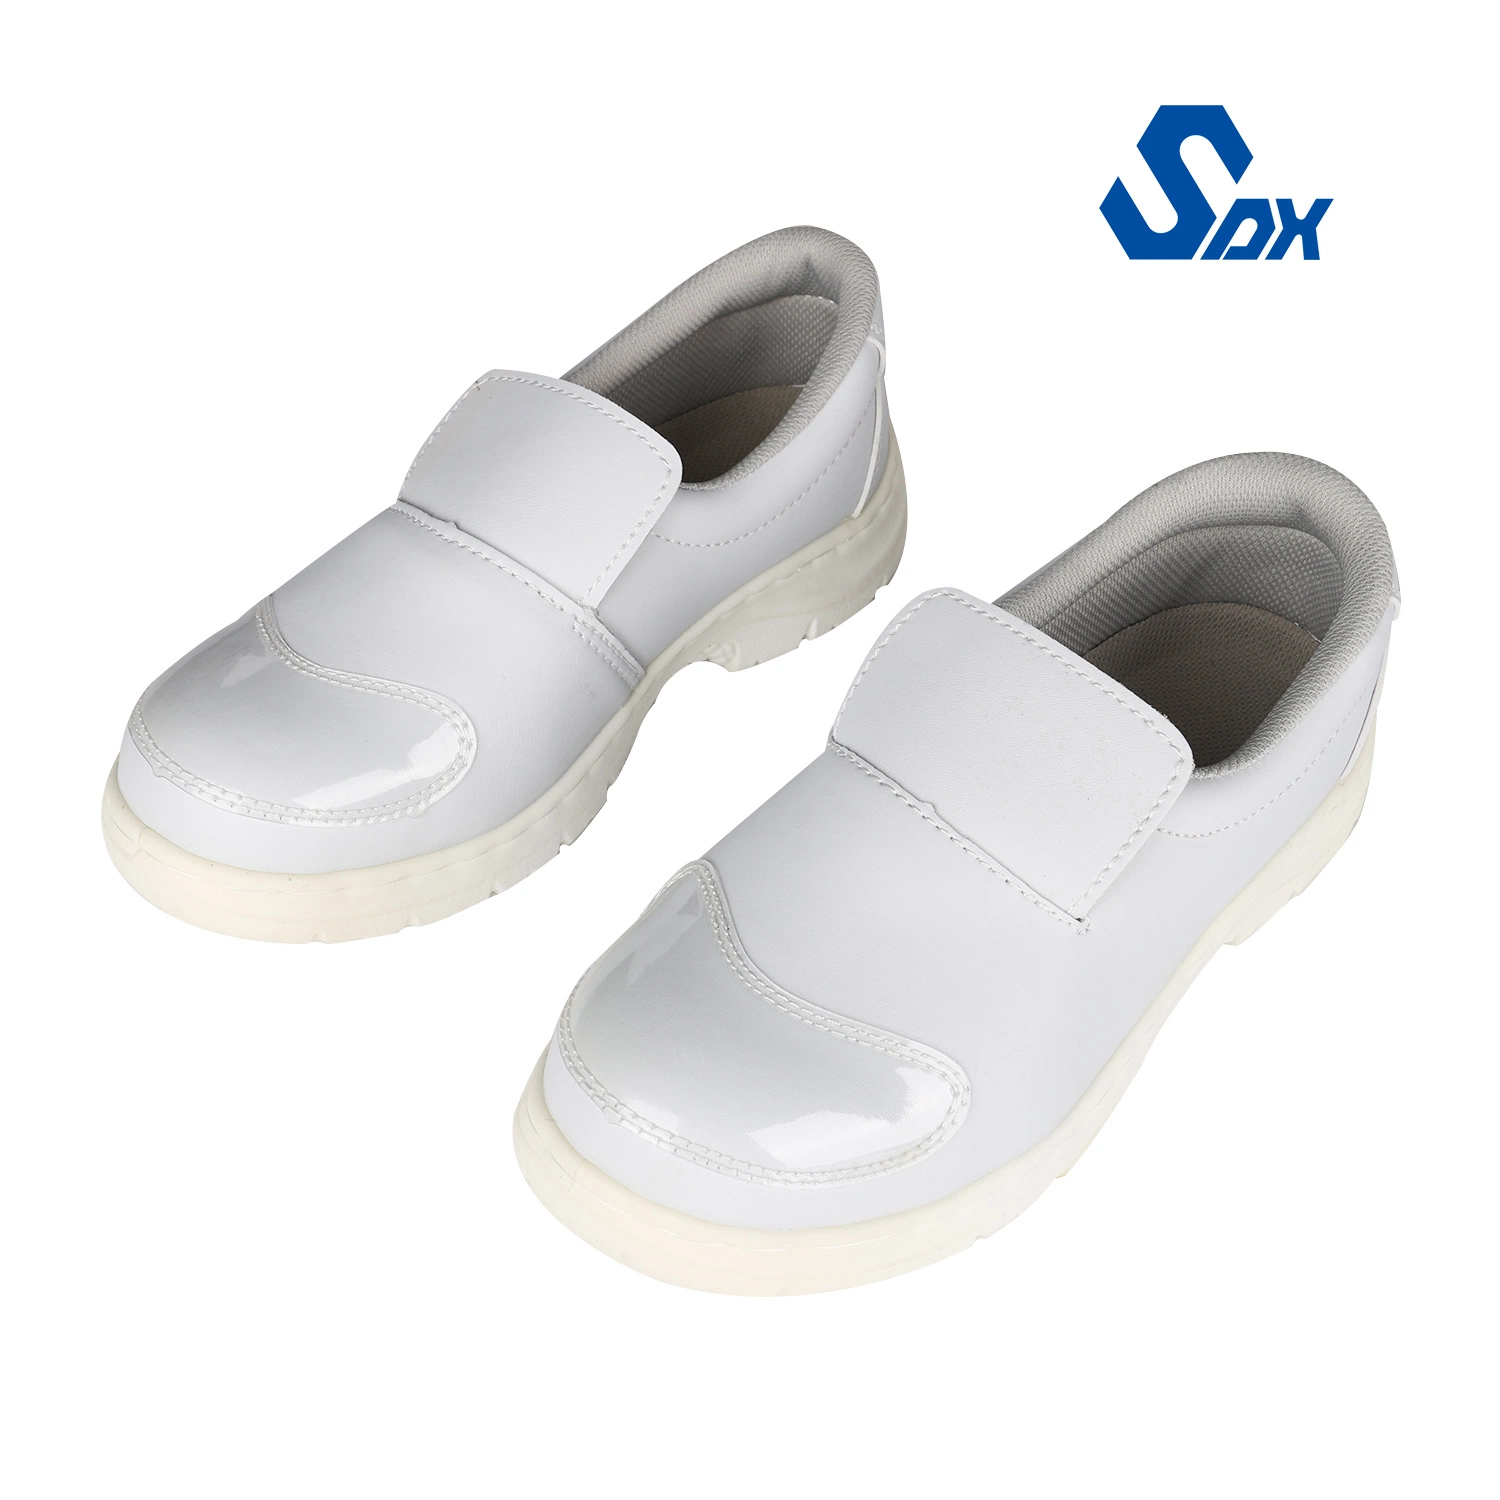 ESD Cleanroom PU Sole Dust Free Shoe ESD Antistatic Work Shoes Safety Shoes